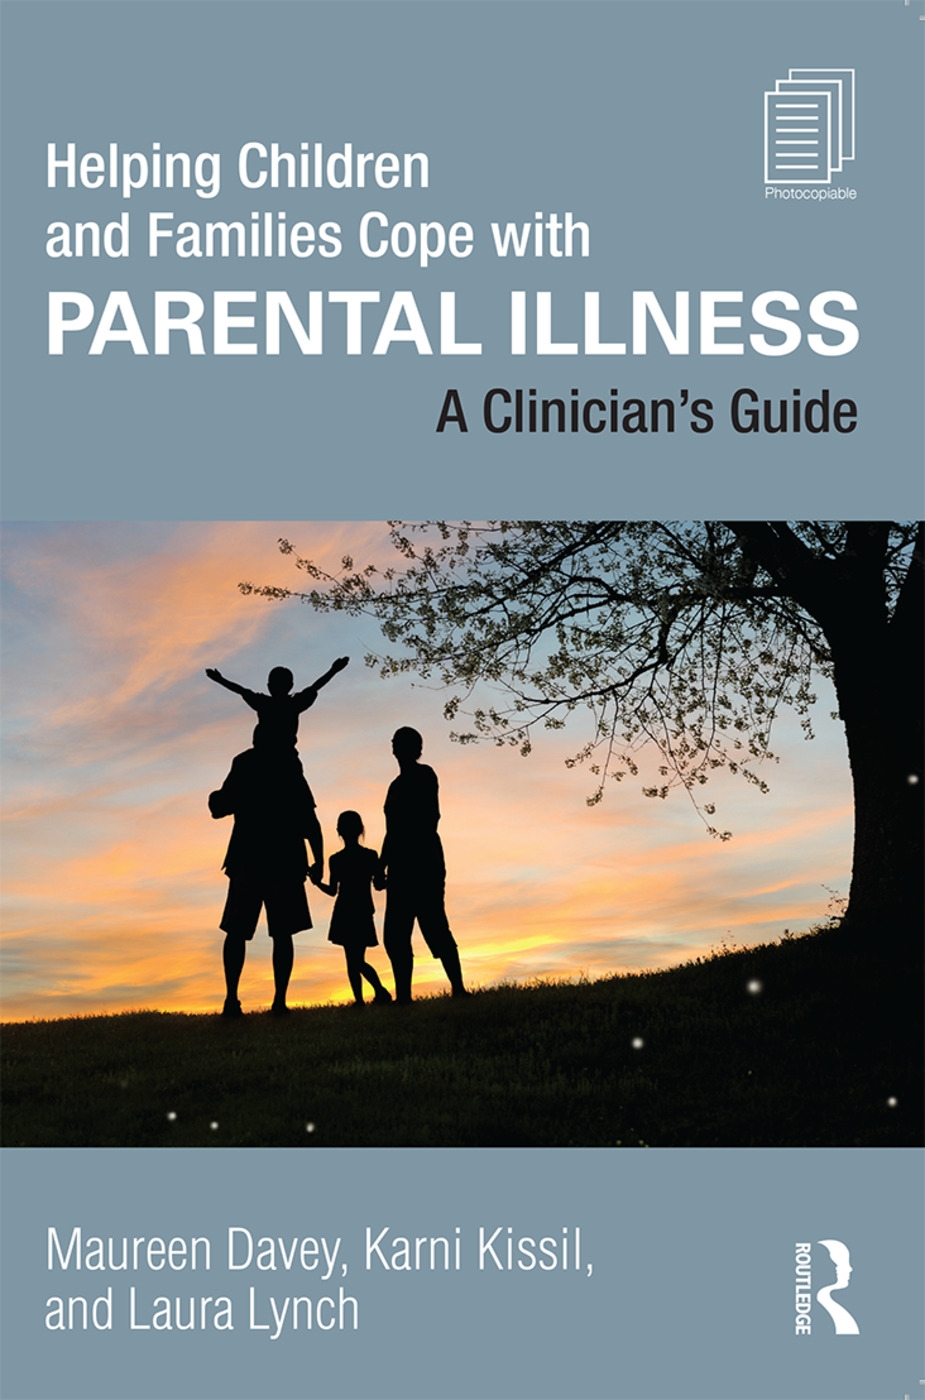 Helping Children and Families Cope with Parental Illness: A Clinician’s Guide